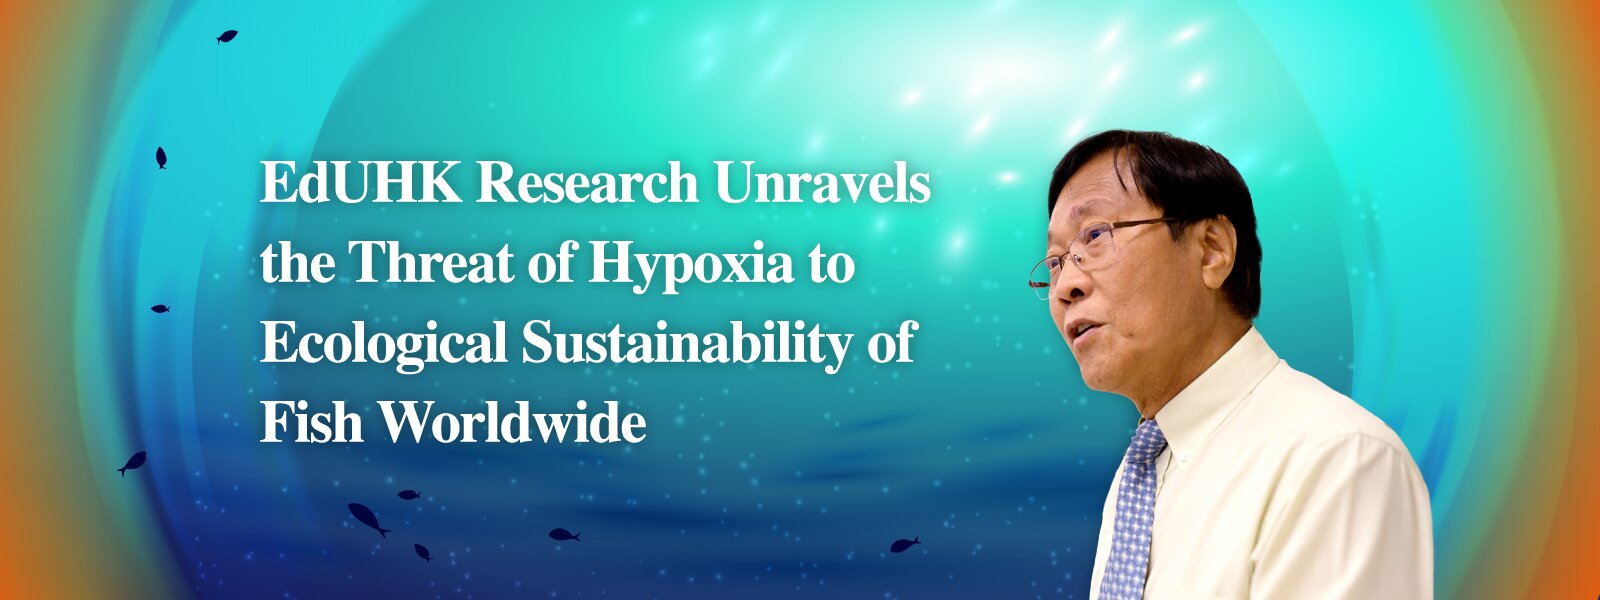 EdUHK Research Unravels the Threat of Hypoxia to Ecological Sustainability of Fish Worldwide